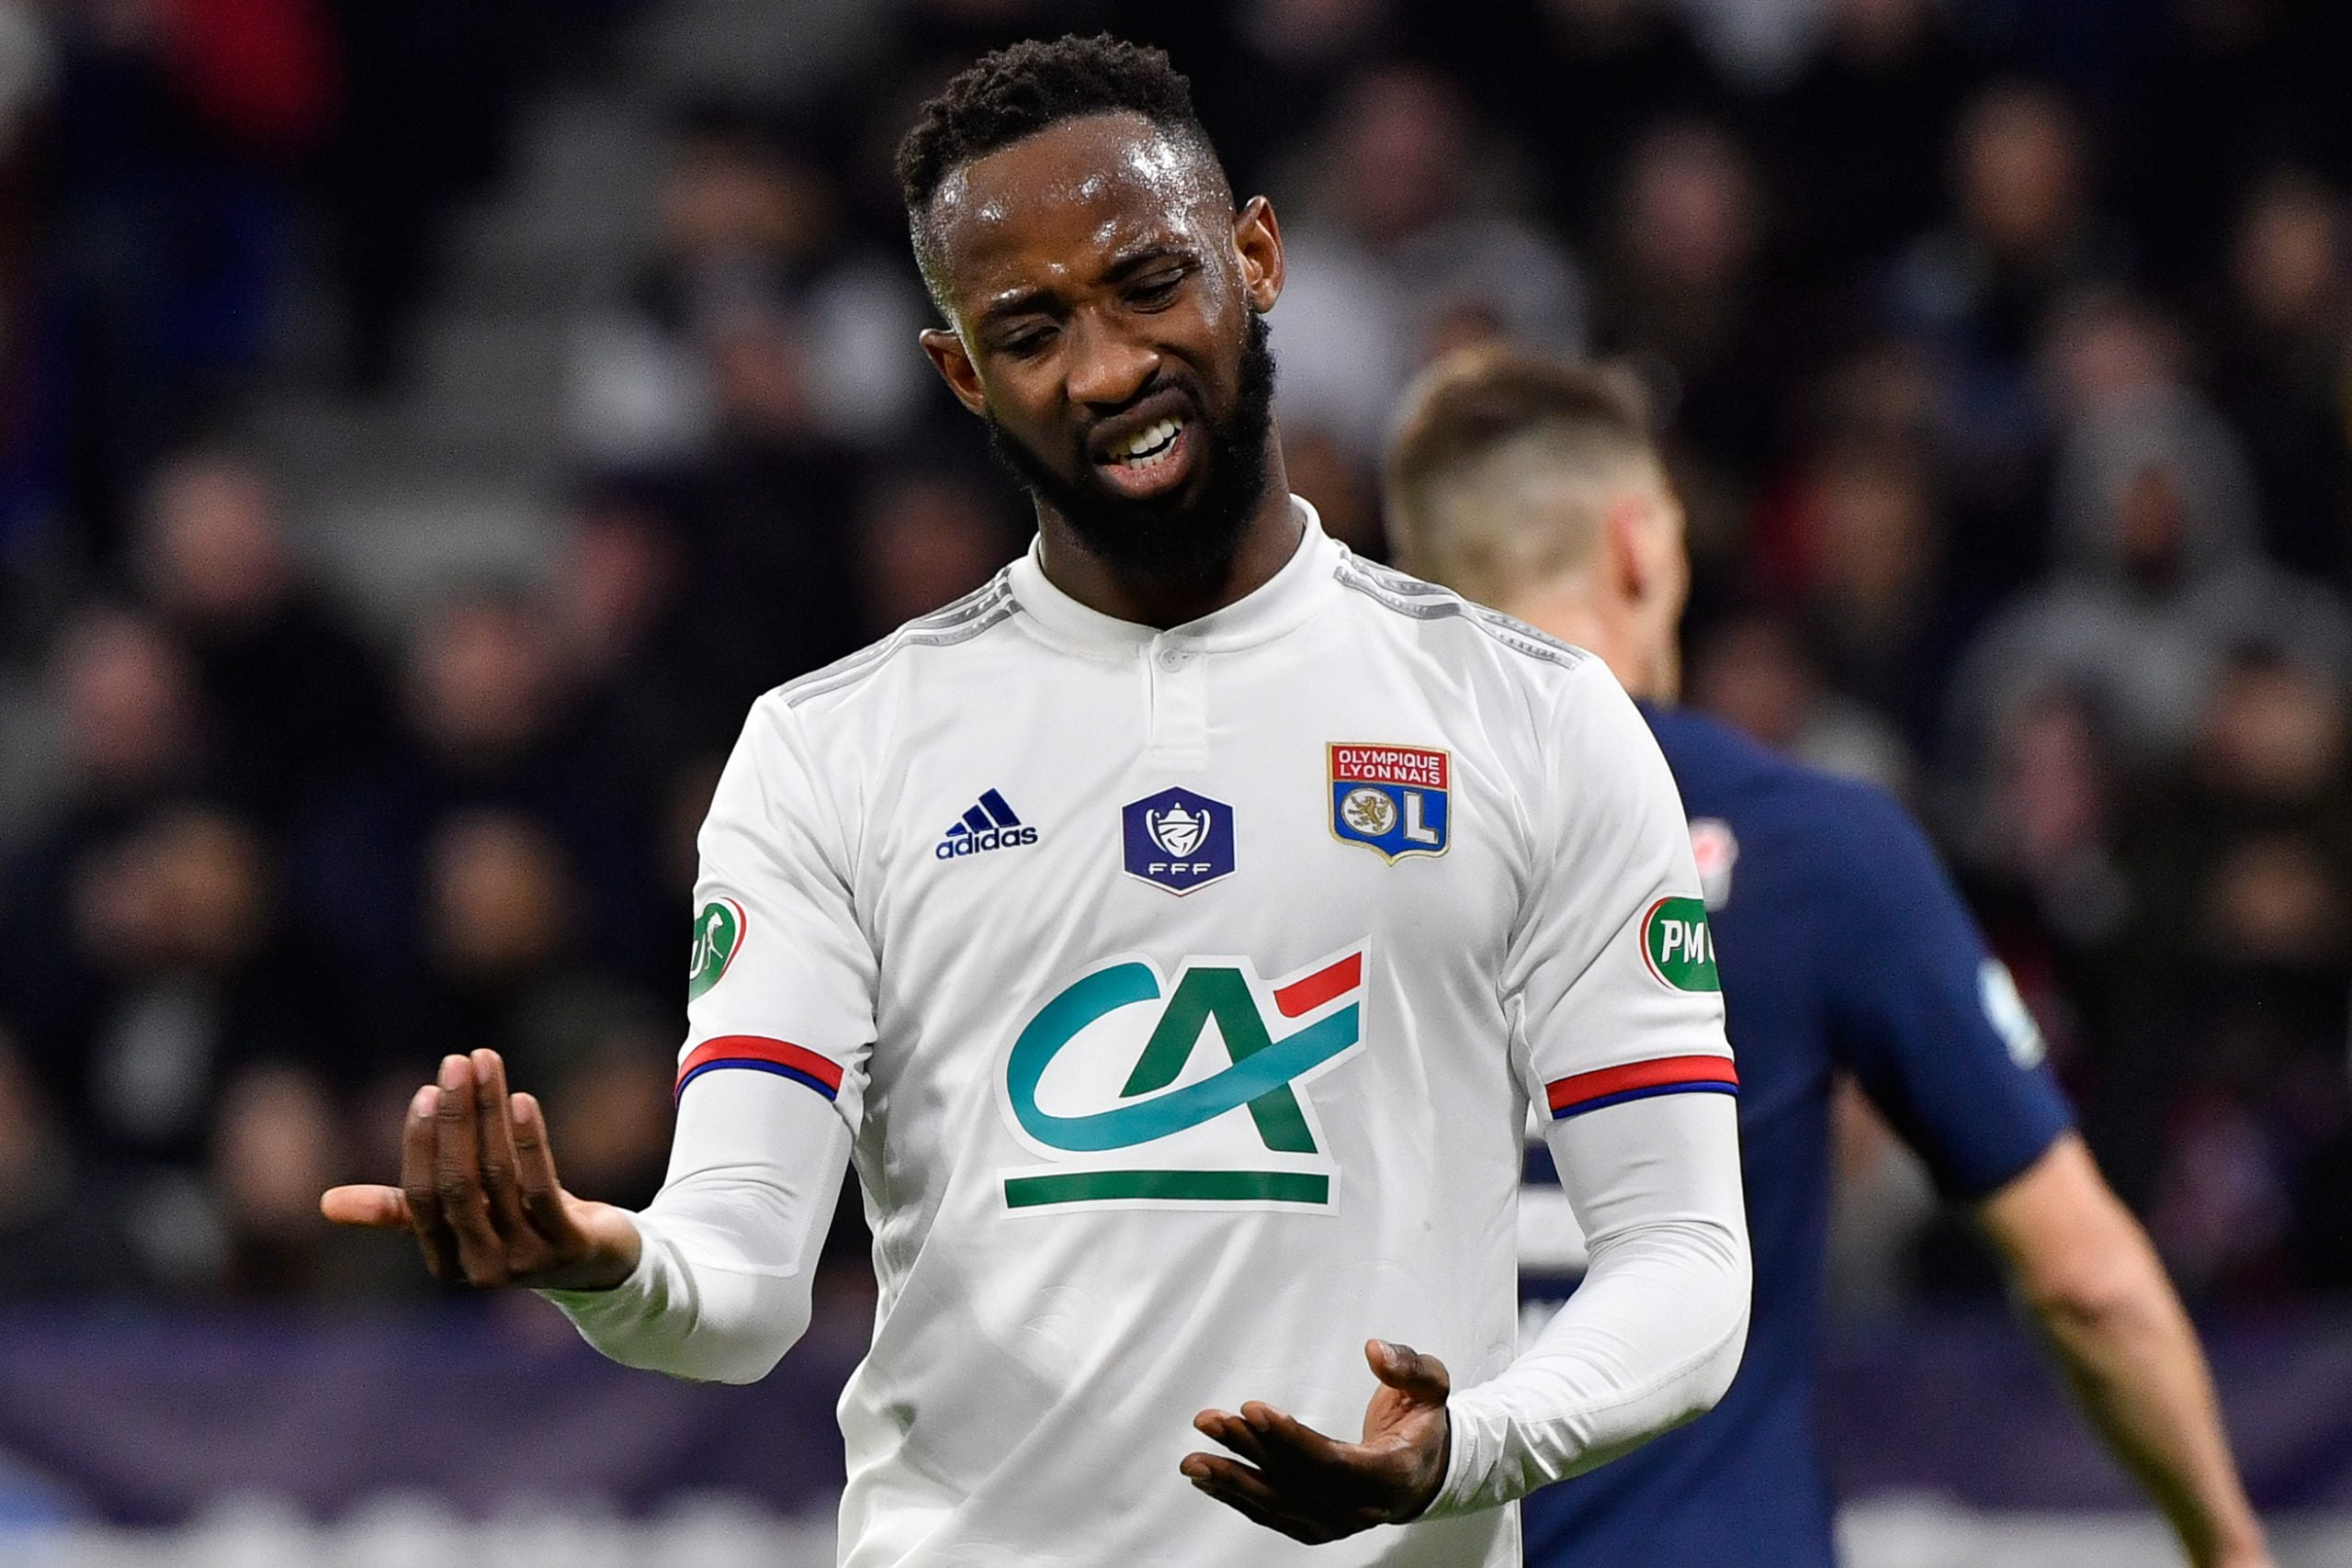 Lyon's French forward Moussa Dembele reacts during the French Cup semi-final football match between Olympique Lyonnais (OL) and Paris Saint-Germain (PSG) at the Groupama Stadium in Decines-Charpieu, centraleastern France, on March 4, 2020. (Photo by Philippe DESMAZES / AFP) (Photo by PHILIPPE DESMAZES/AFP via Getty Images)